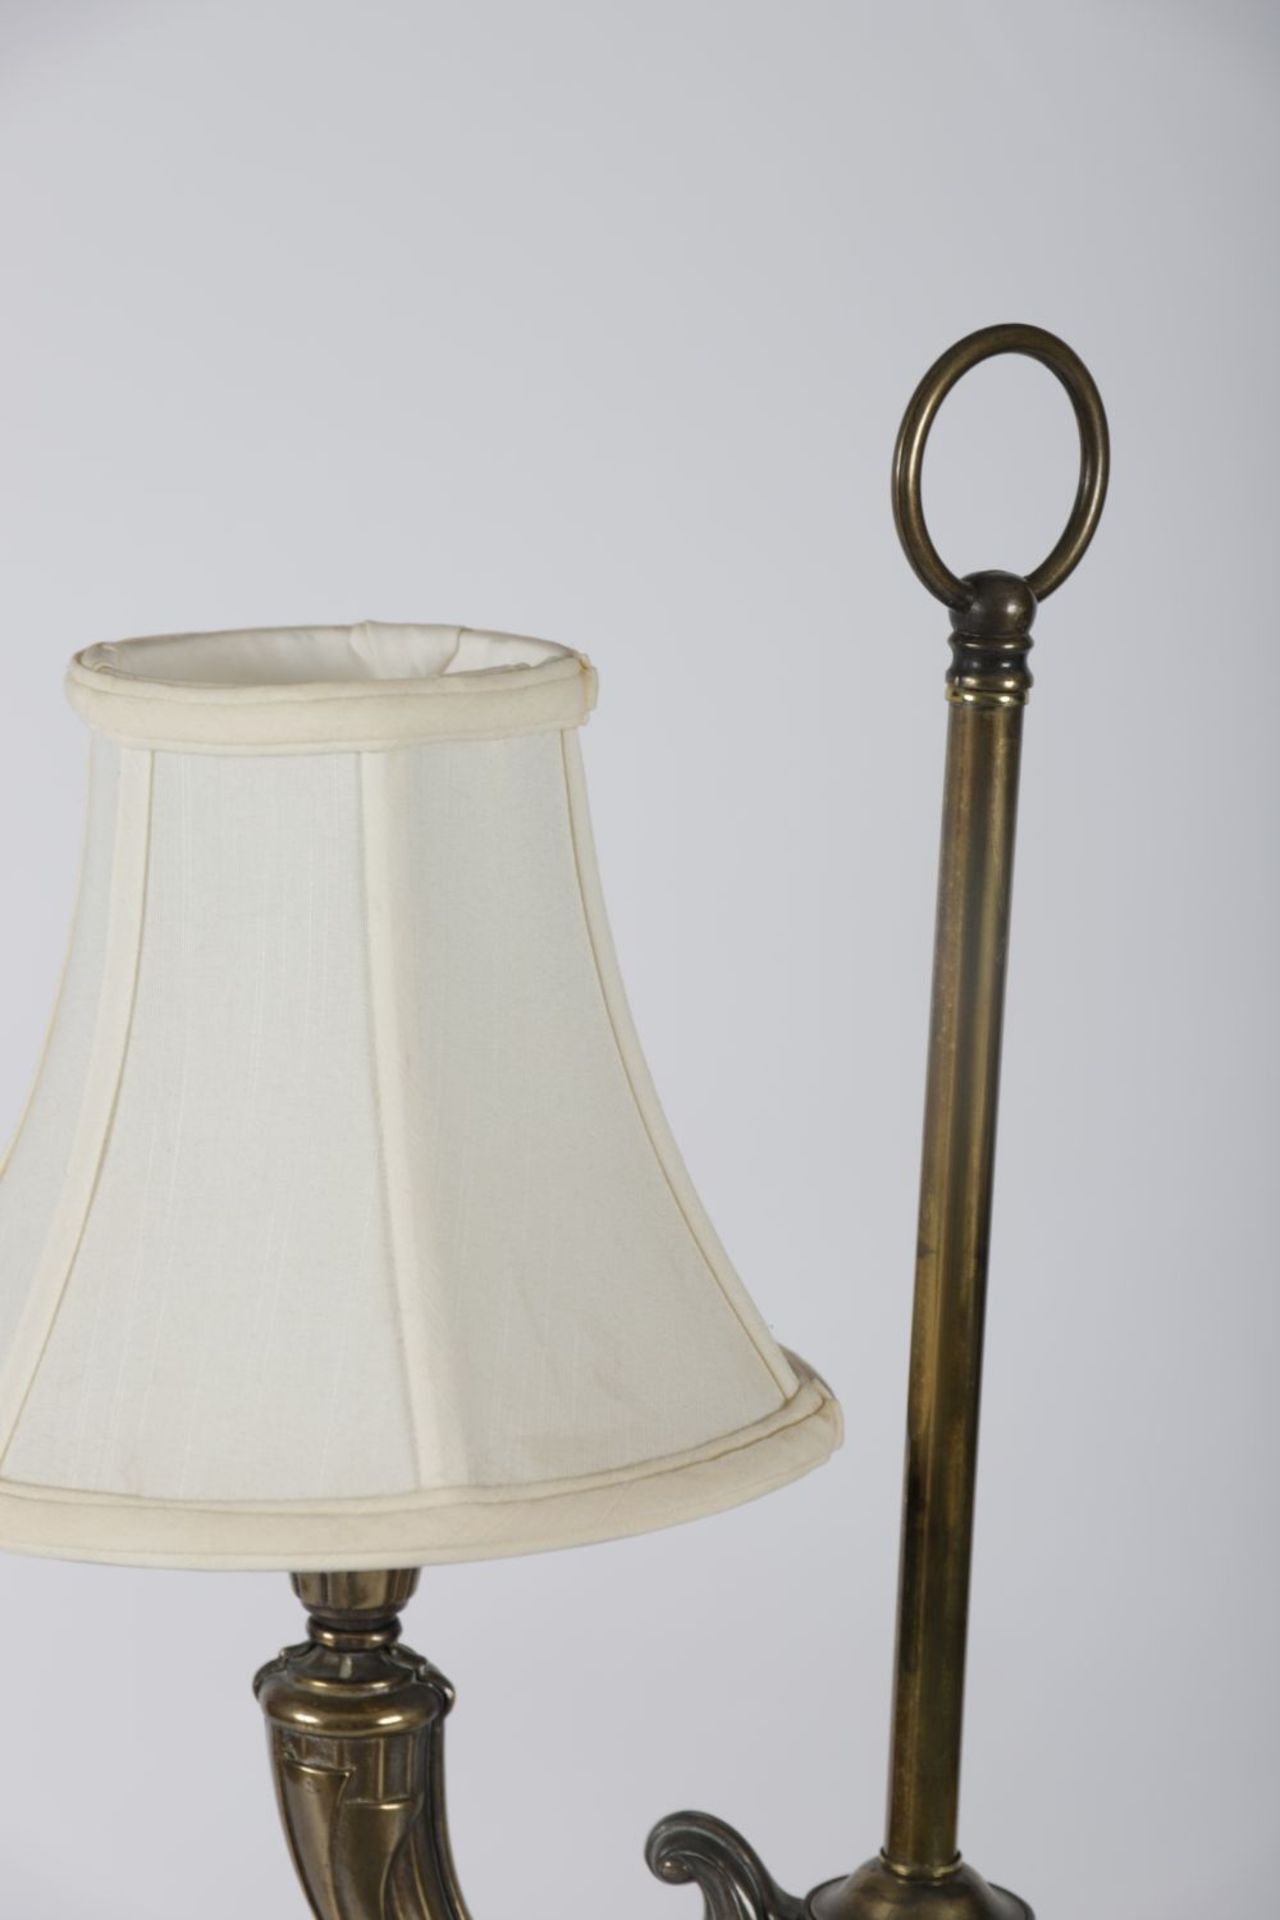 EDWARDIAN BRASS TABLE LAMP - Image 3 of 3